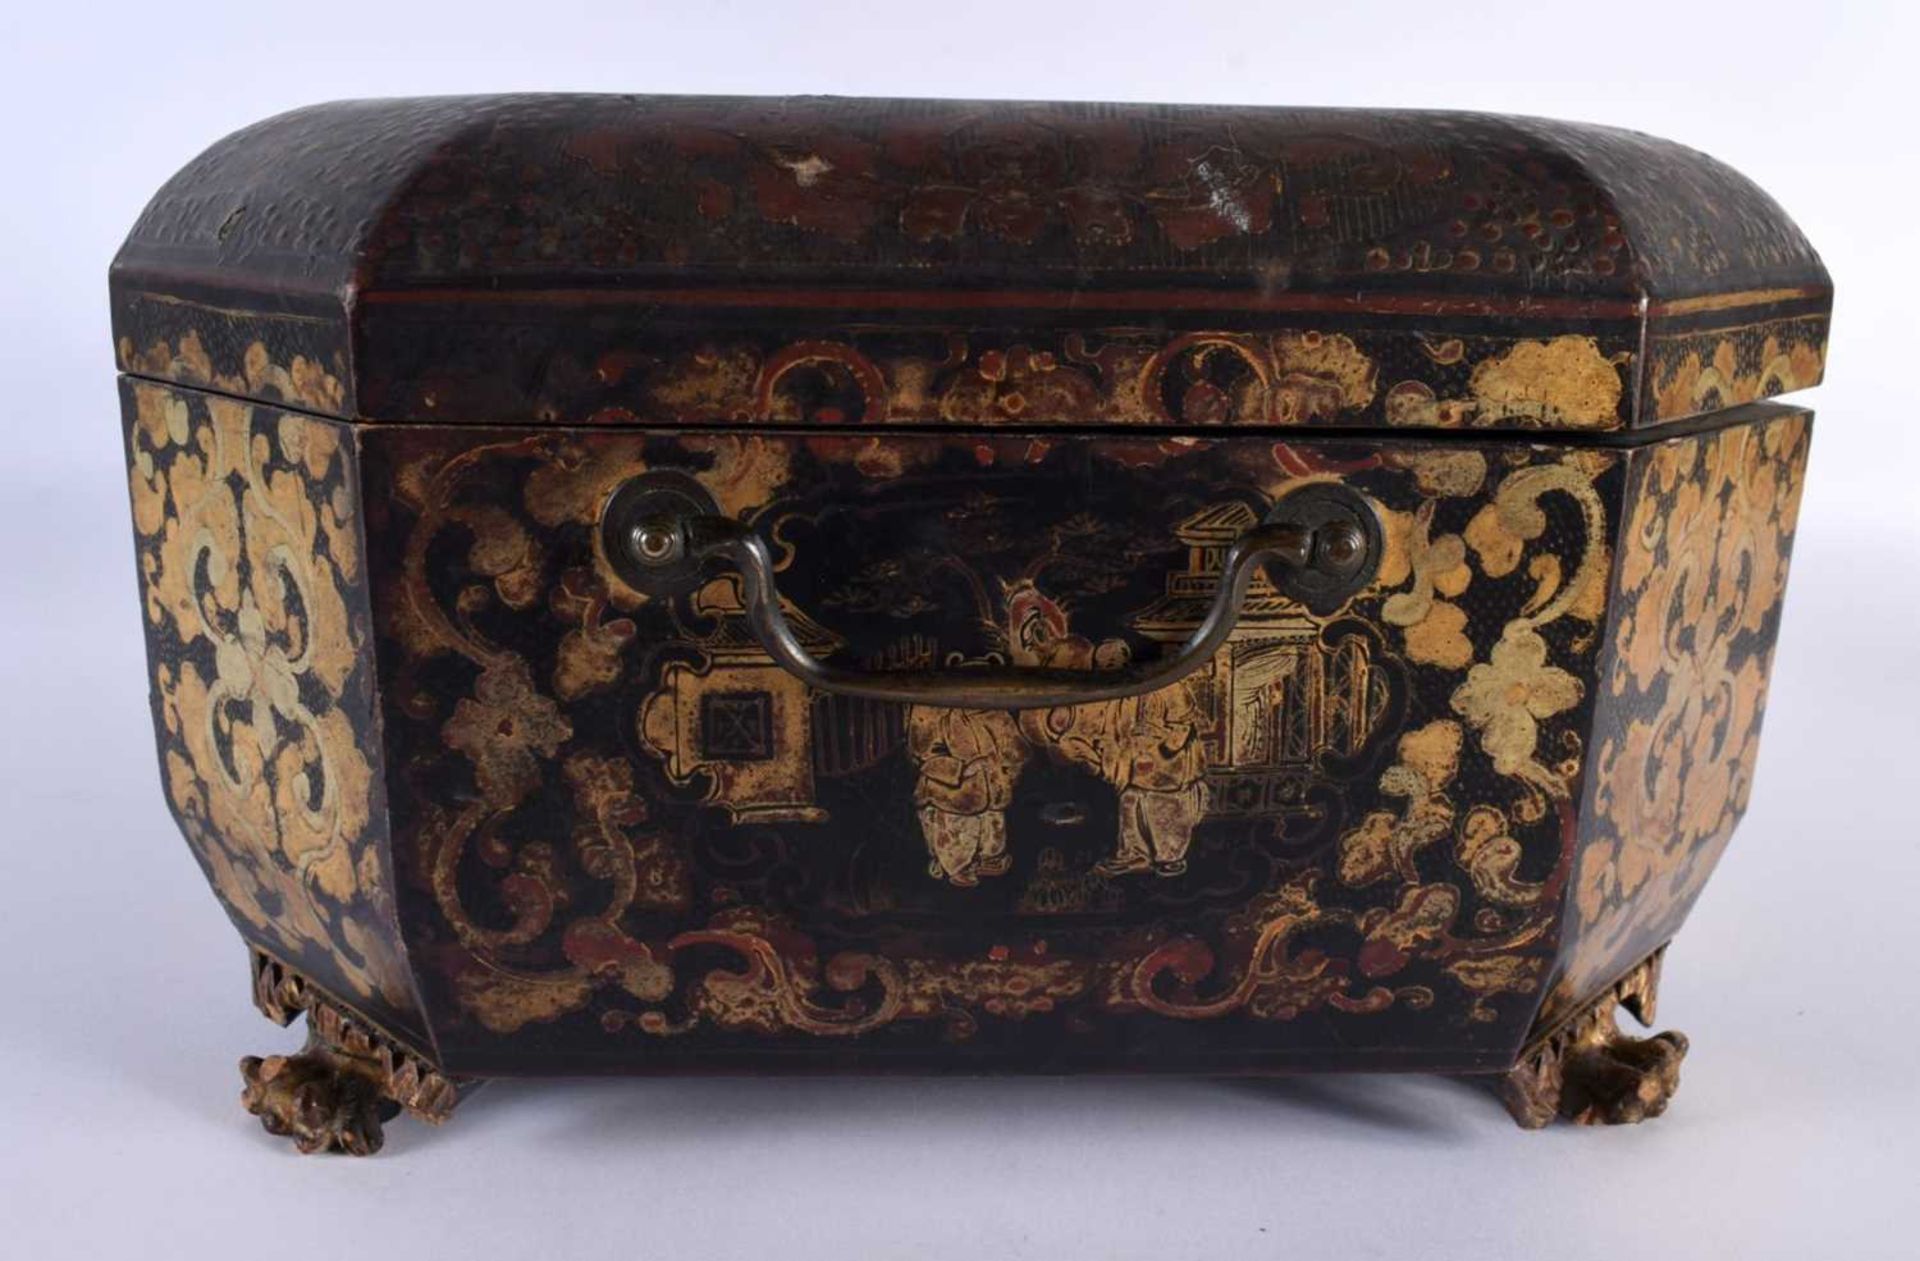 A LATE 18TH/19TH CENTURY CHINESE EXPORT RED AND BLACK LACQUER CASKET painted with Chinese figures in - Image 4 of 6